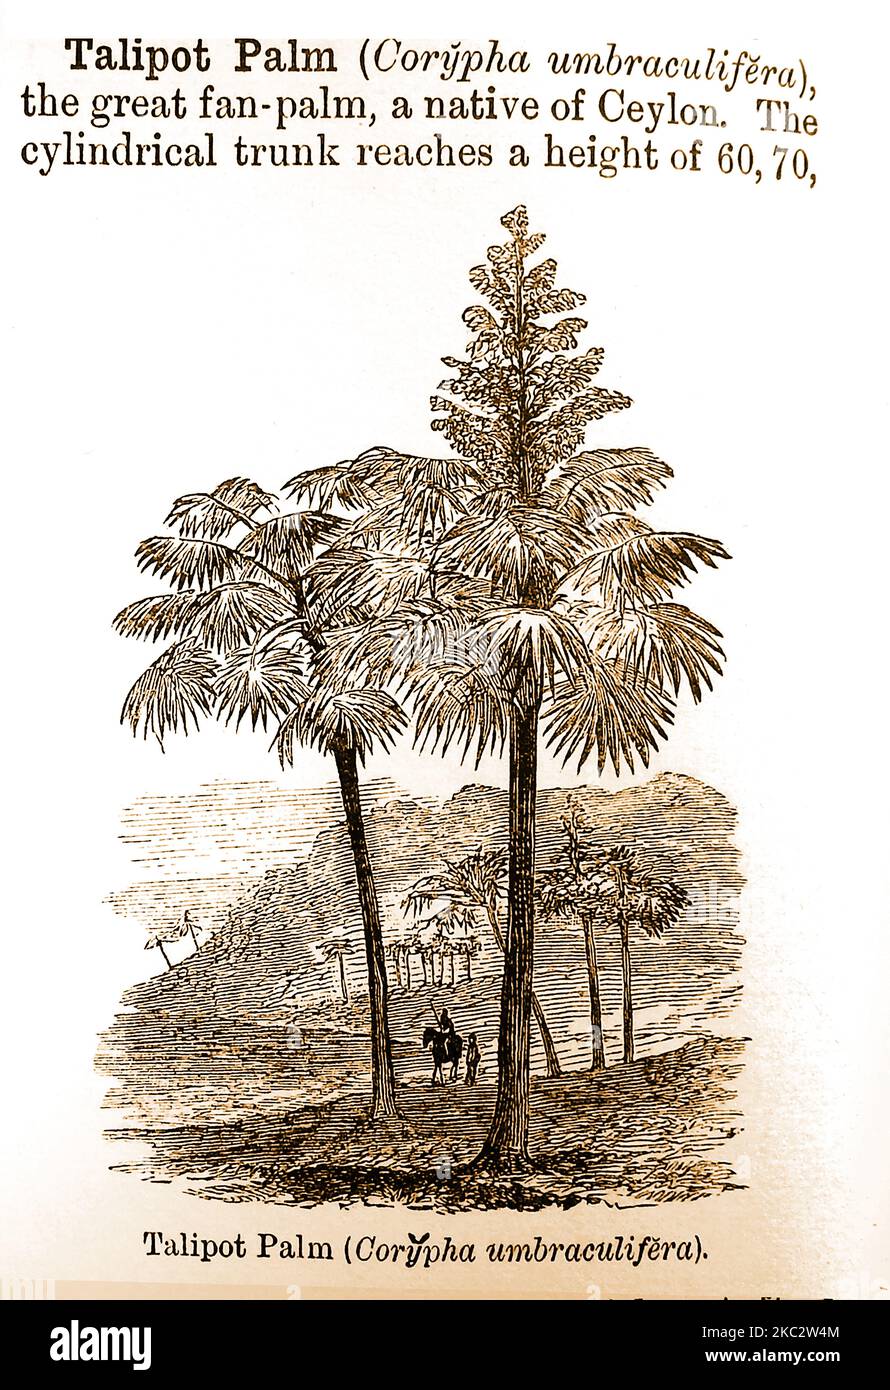 A 19th century dictionary engraving and description of a Talipot Palm (Corypha umbraculifera) a species  native to  India and Sri Lanka that is also found in China, Cambodia, Myanmar,  Thailand and the Andaman Islands. It is known for its large inflorescence, the largest  in the world an can live up to 60 years before the flowers and fruits appear.  Une gravure dans un dictionnaire du 19ème siècle et la description d’un palmier Talipot (Corypha umbraculifera).  Il est connu pour sa grande inflorescence, la plus grande au monde Stock Photo